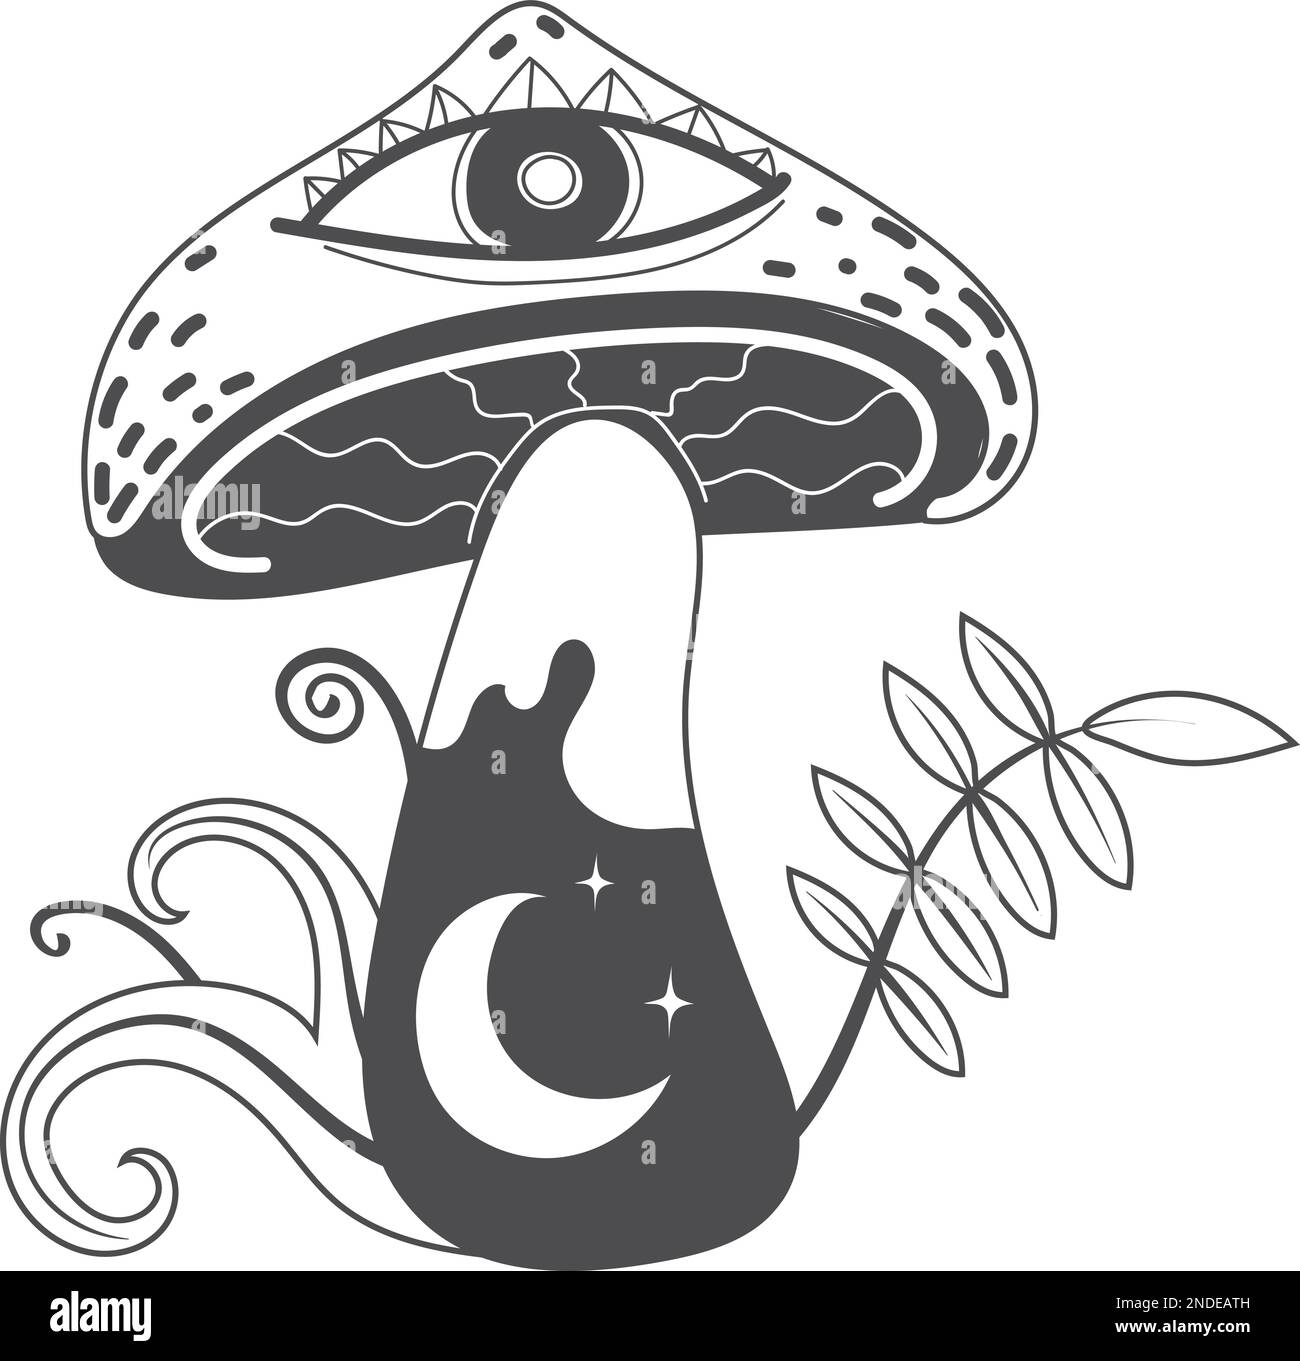 Occult mushroom tattoo. Spiritual esoteric boho drawing isolated on white background Stock Vector